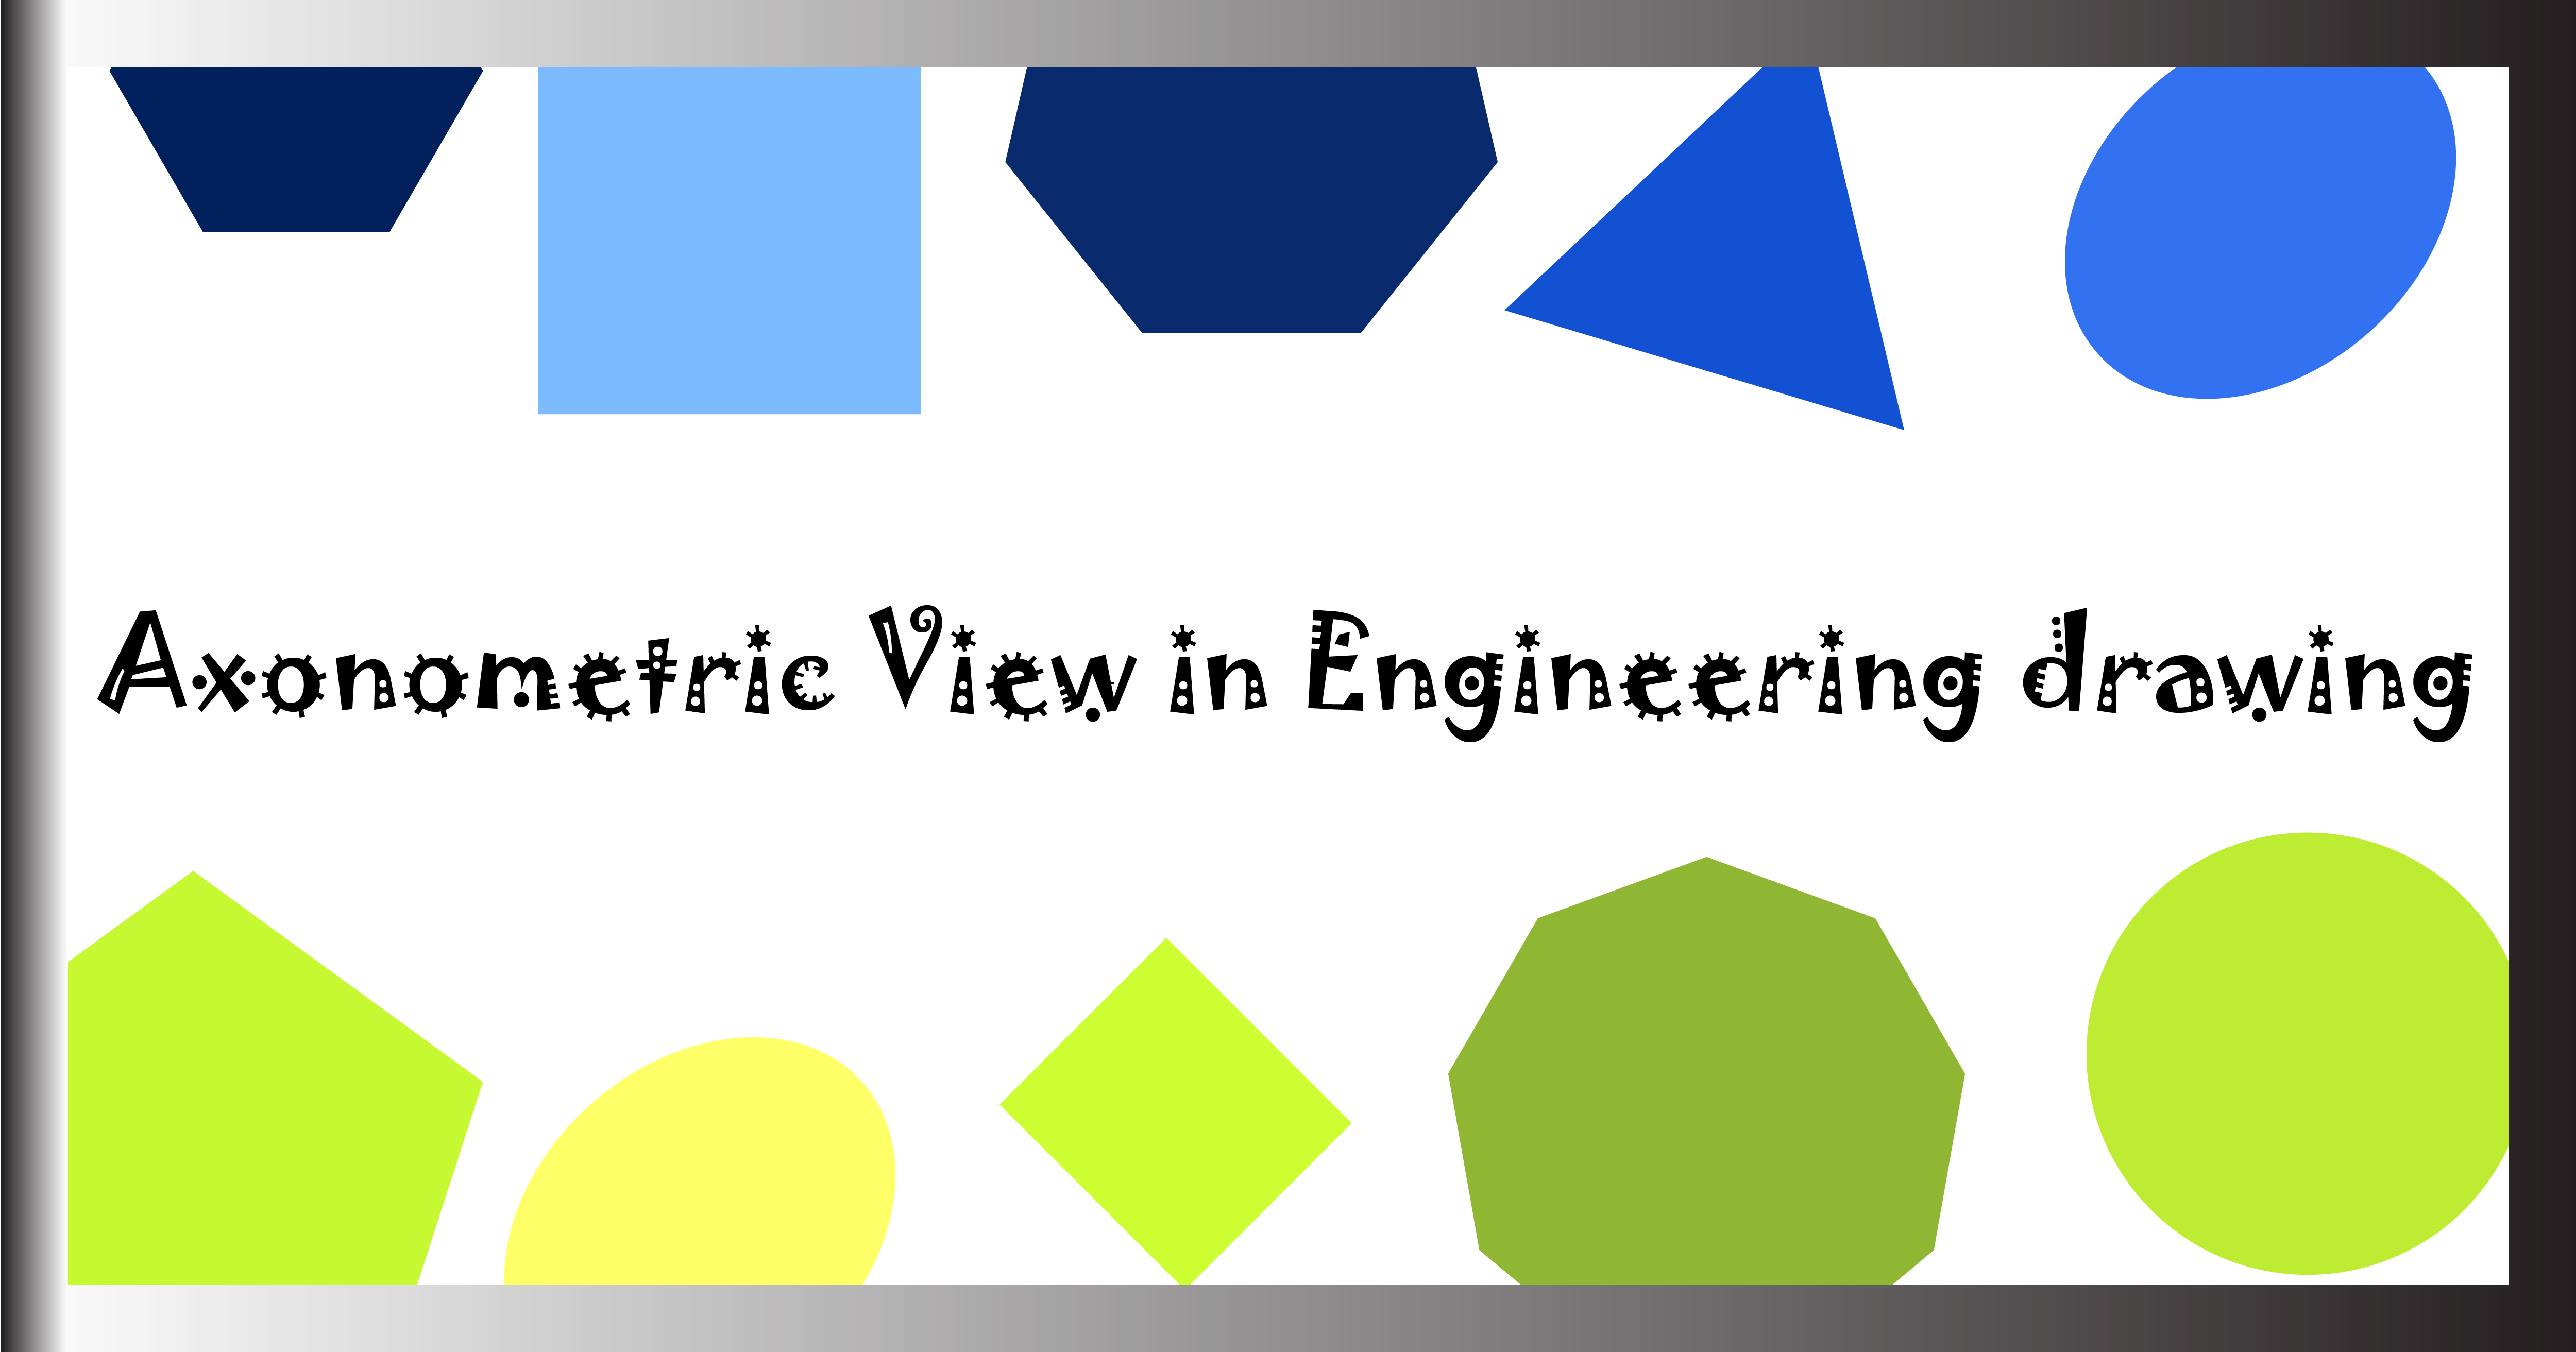 Axonometric View in Engineering drawing